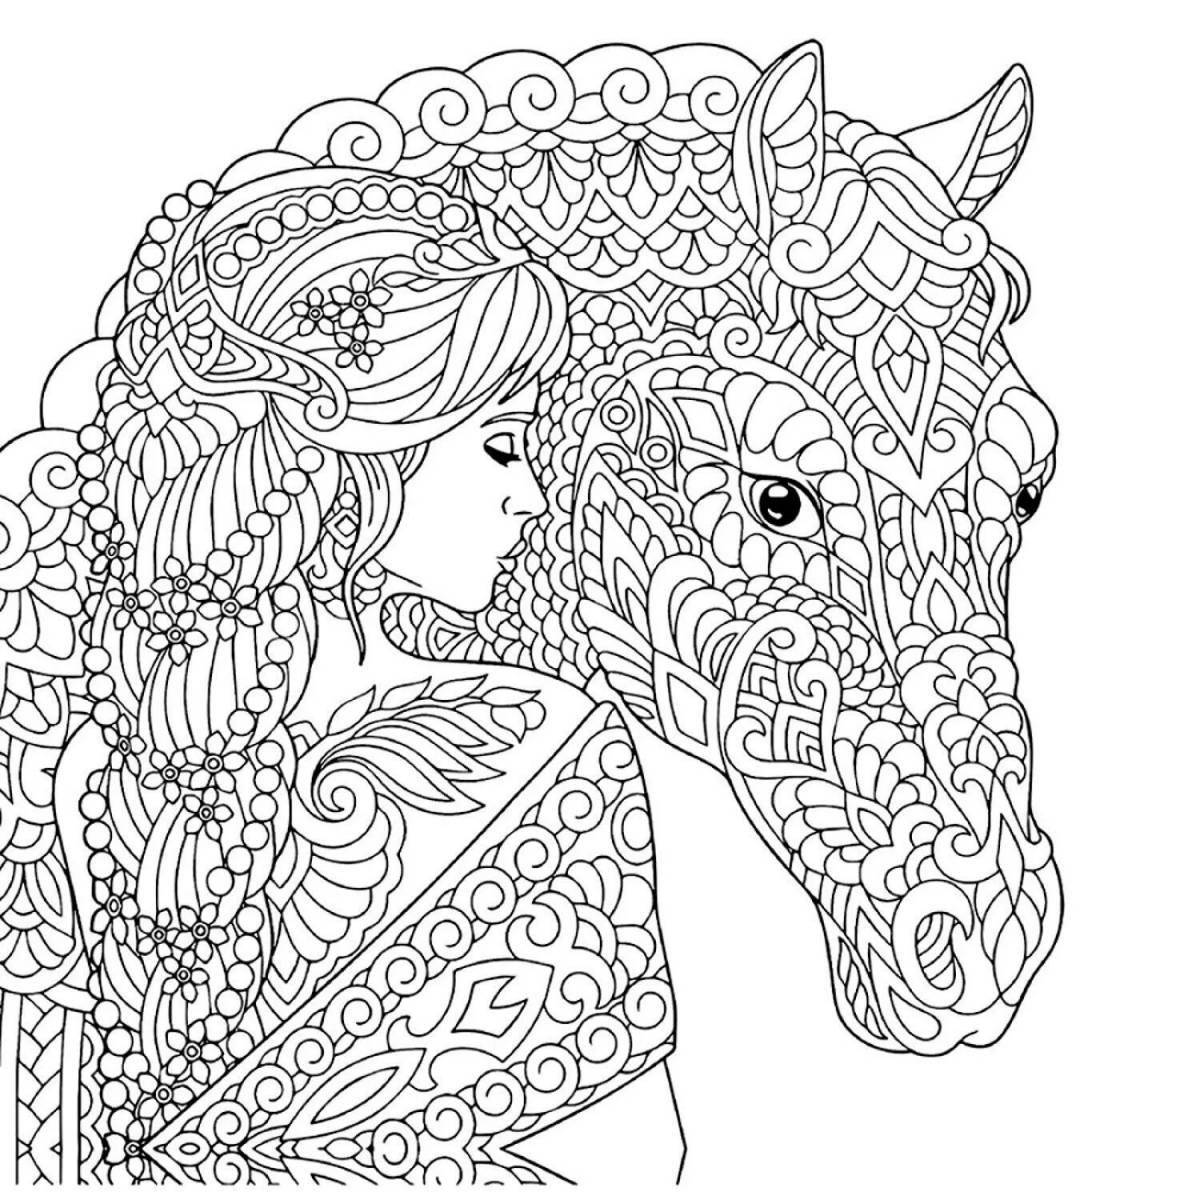 Charming coloring book for girls 12 years old intricate patterns antistress animals